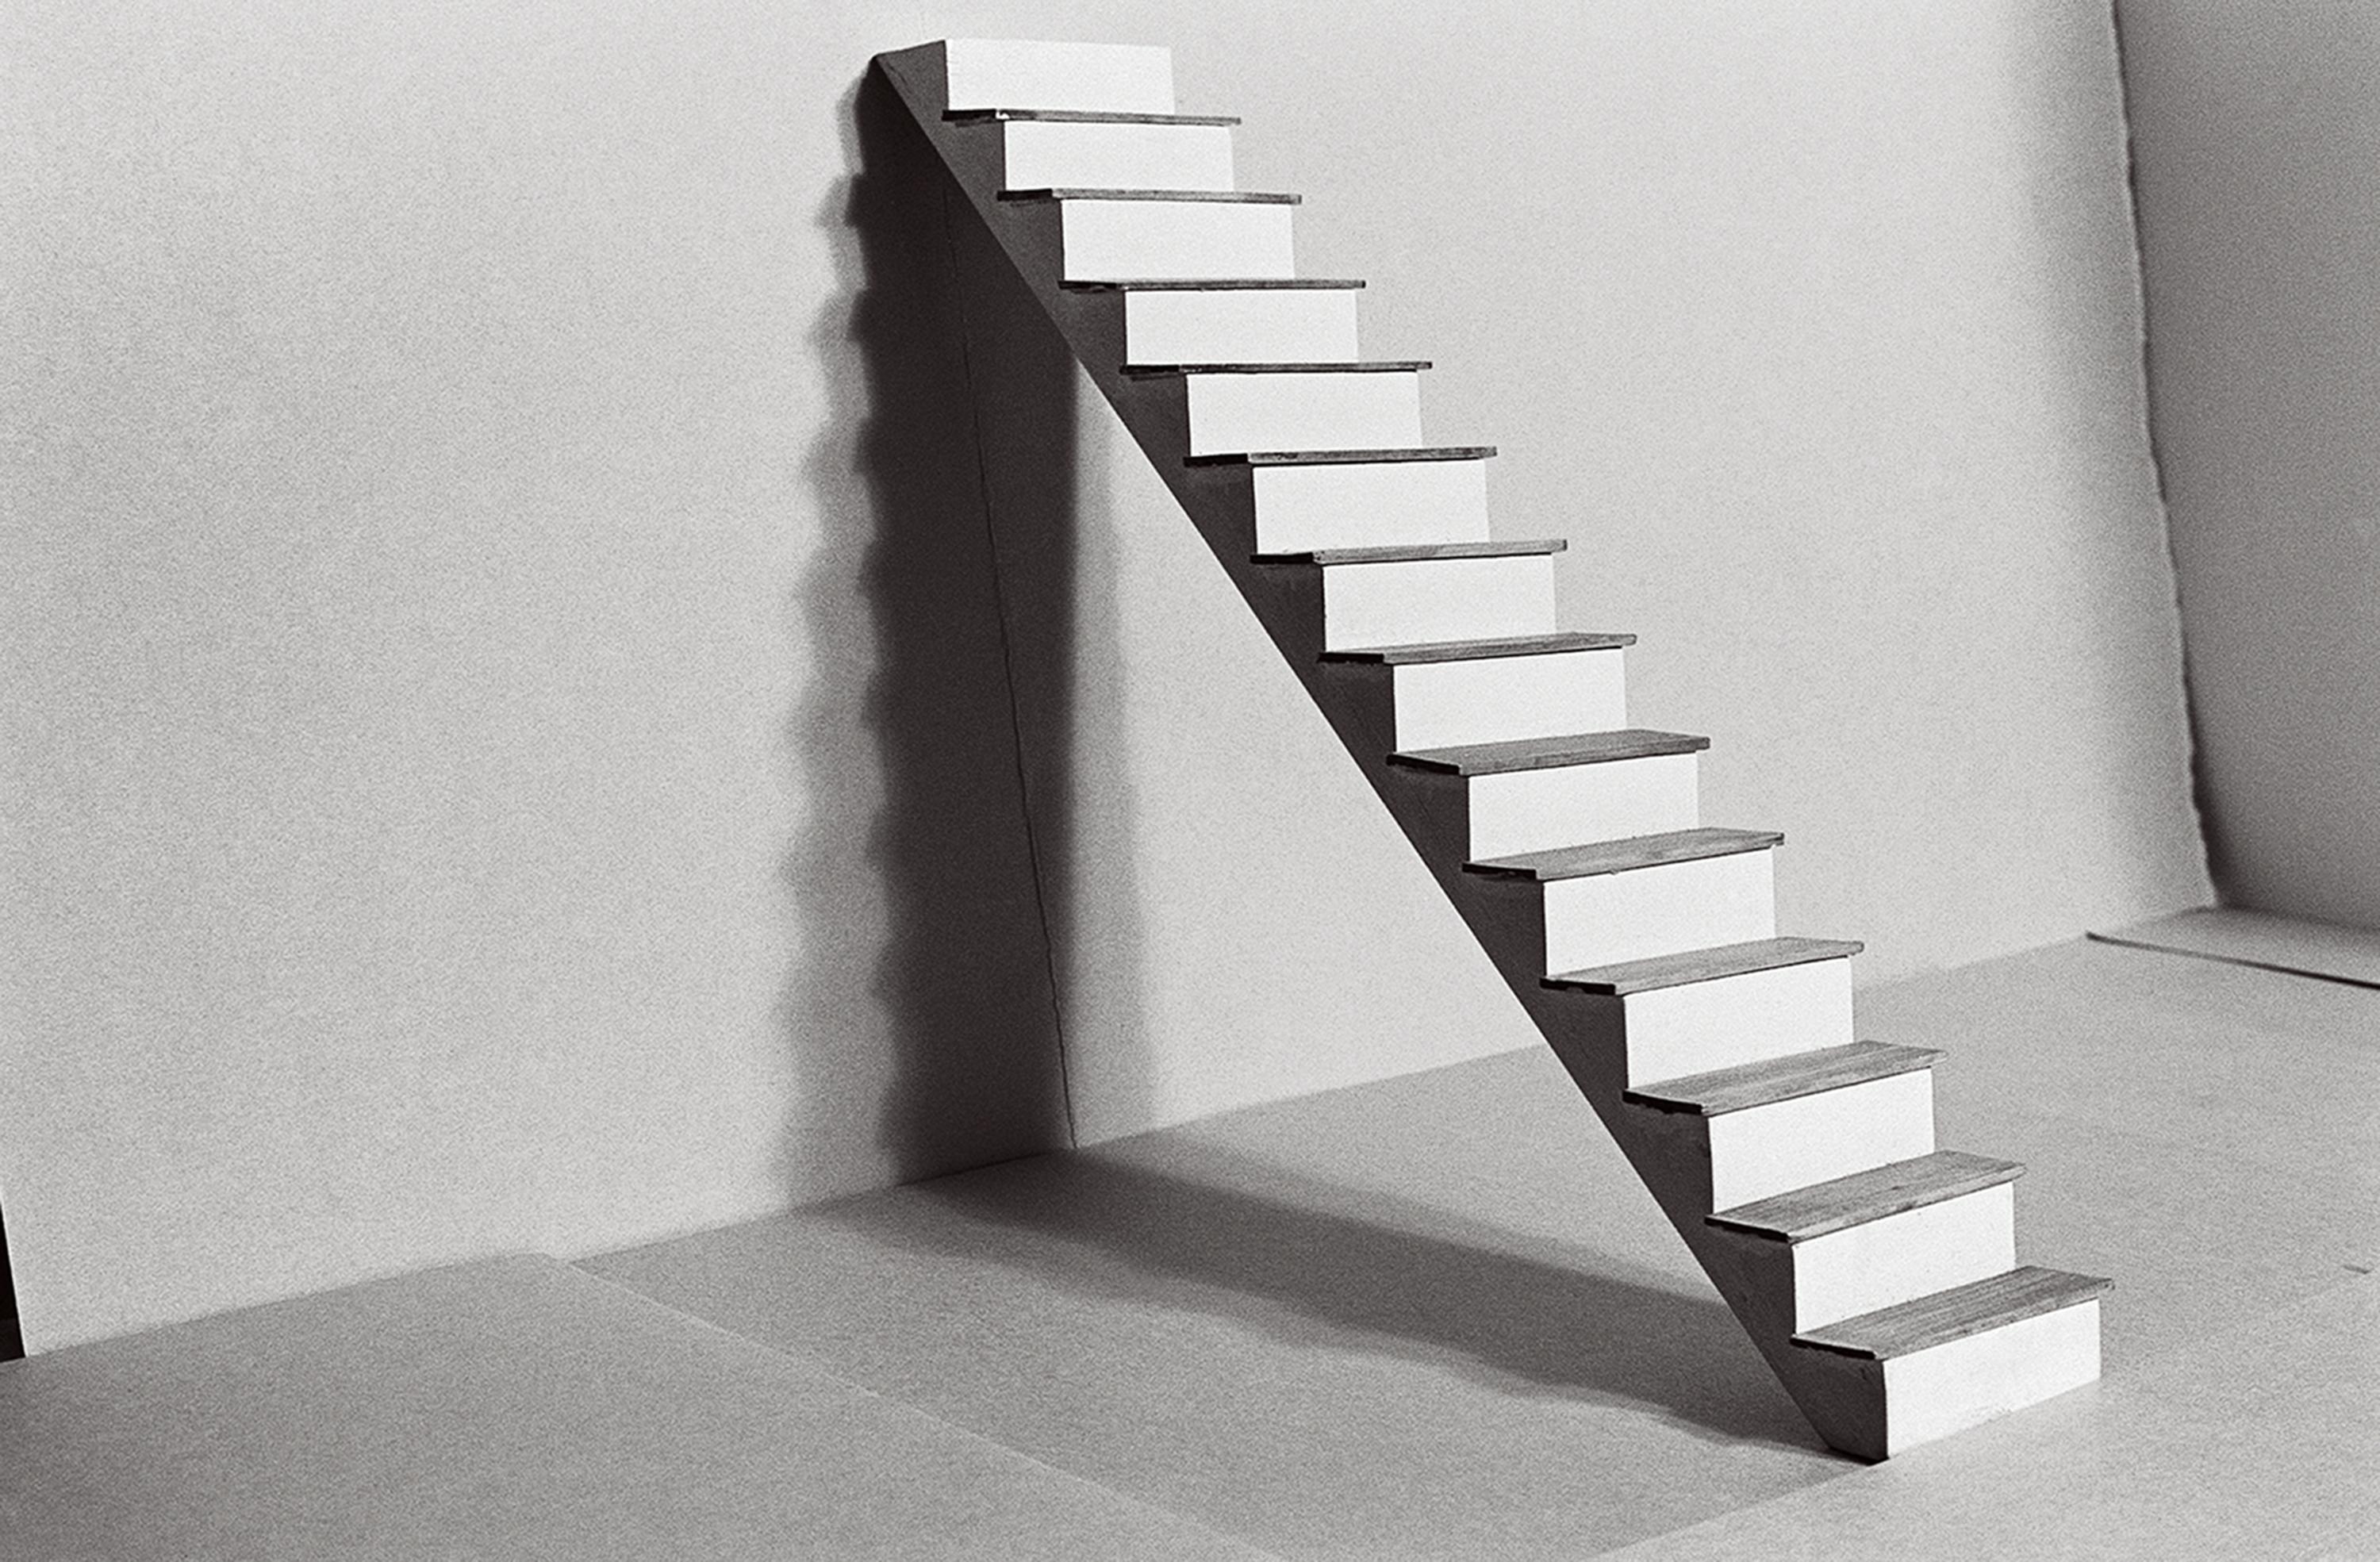 This black-and-white photo depicts a set of fourteen stairs that lead to a bare wall. The stairs create a stark, ninety-degree shadow against the wall and floor.